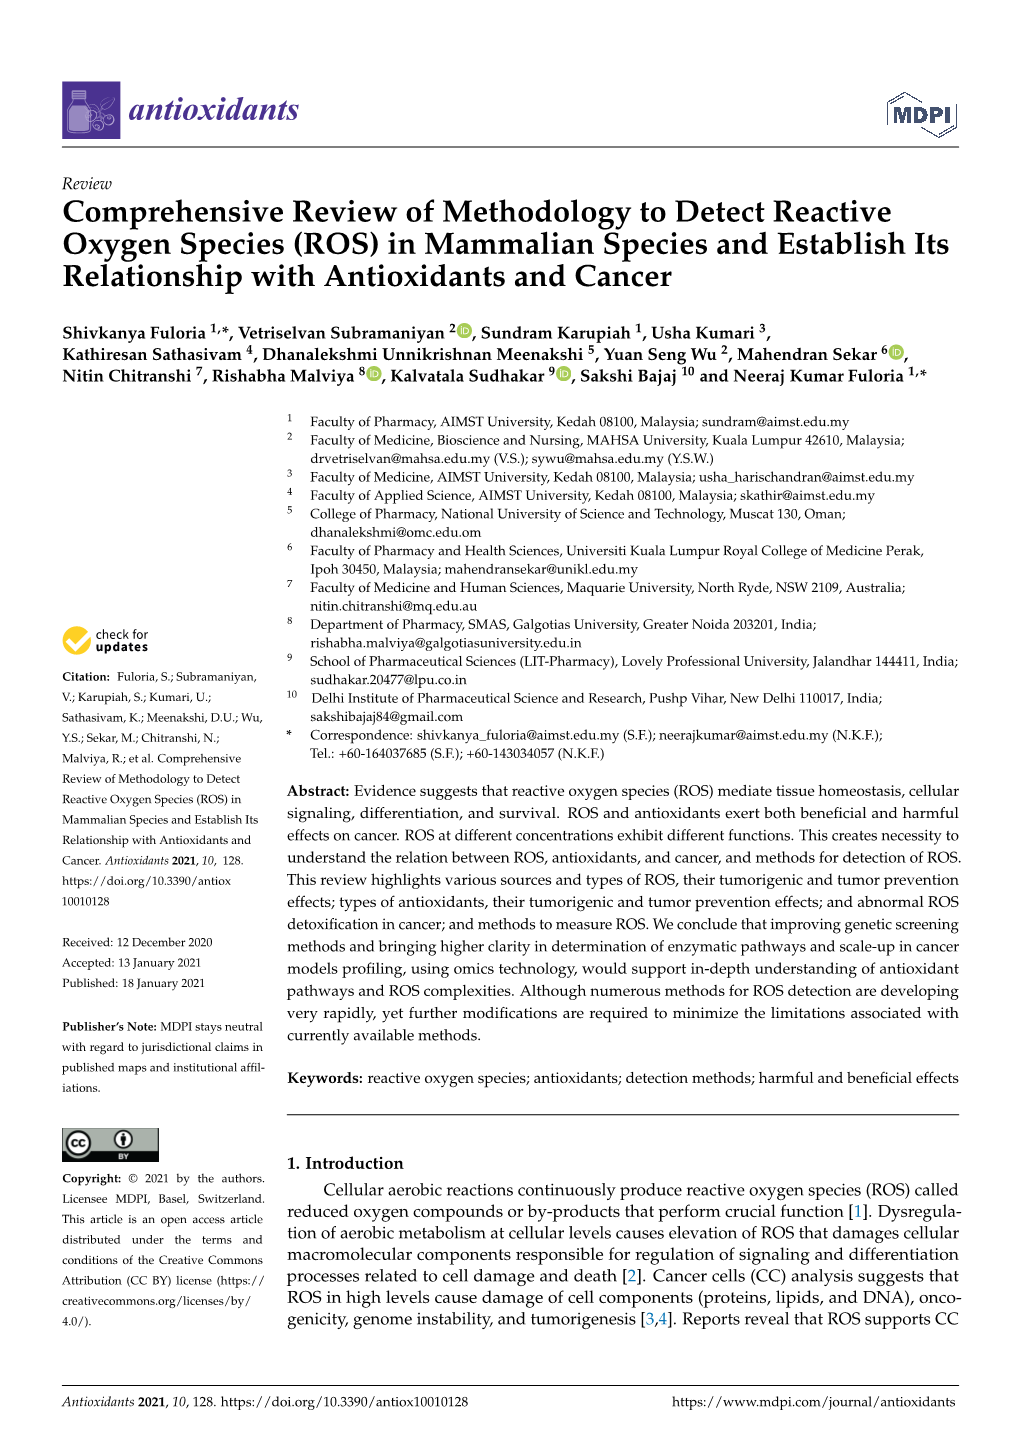 Comprehensive Review of Methodology to Detect Reactive Oxygen Species (ROS) in Mammalian Species and Establish Its Relationship with Antioxidants and Cancer